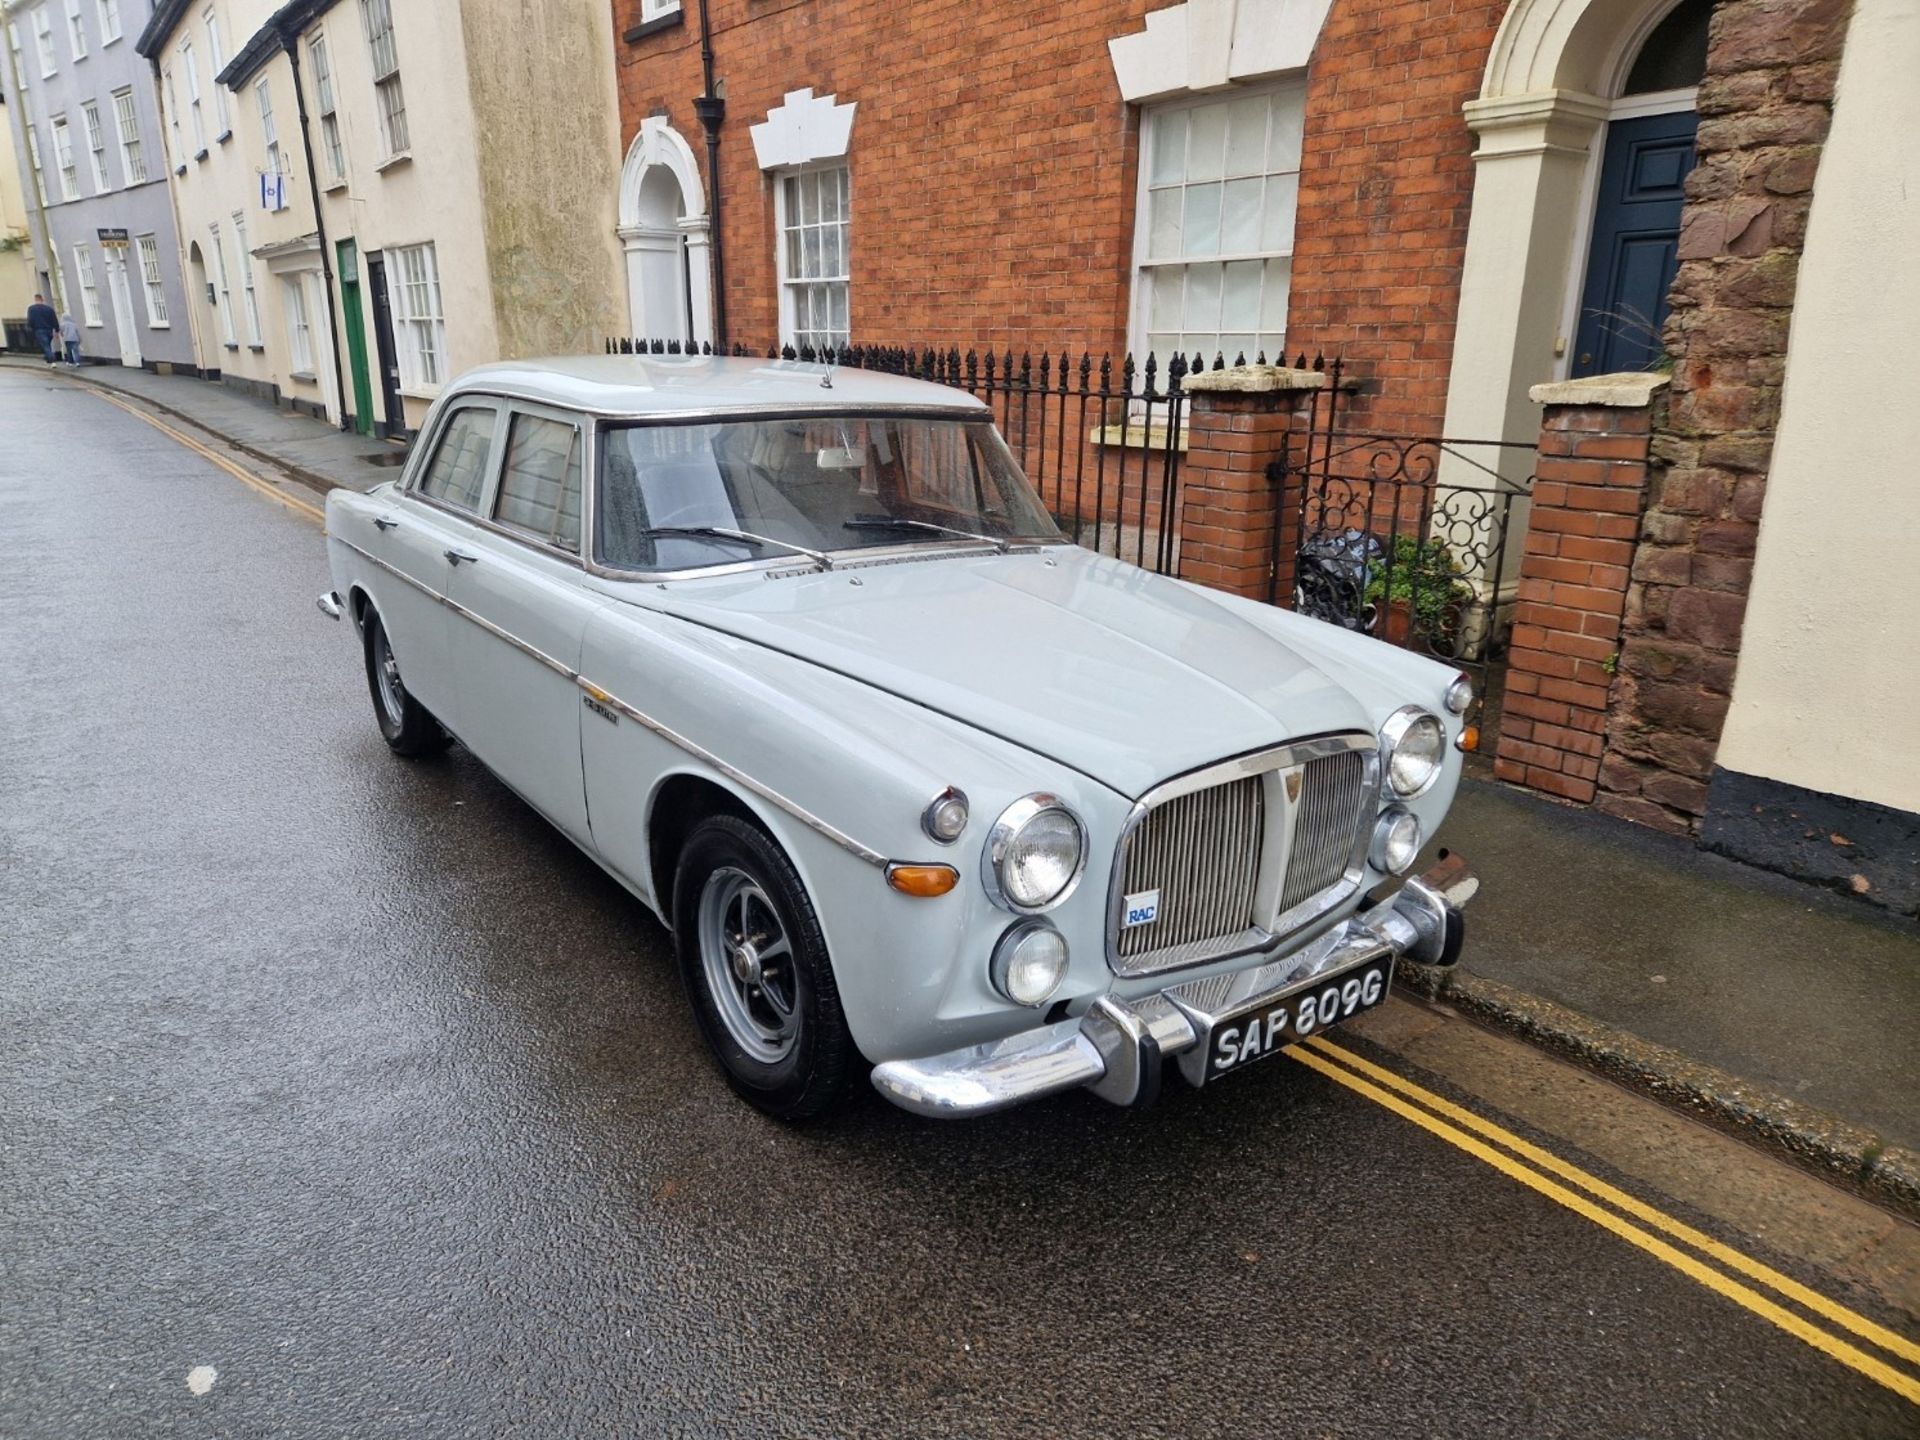 1969 Rover P5B Saloon Registration number SAP 809G Chassis number 84003266B Engine number - Image 5 of 14